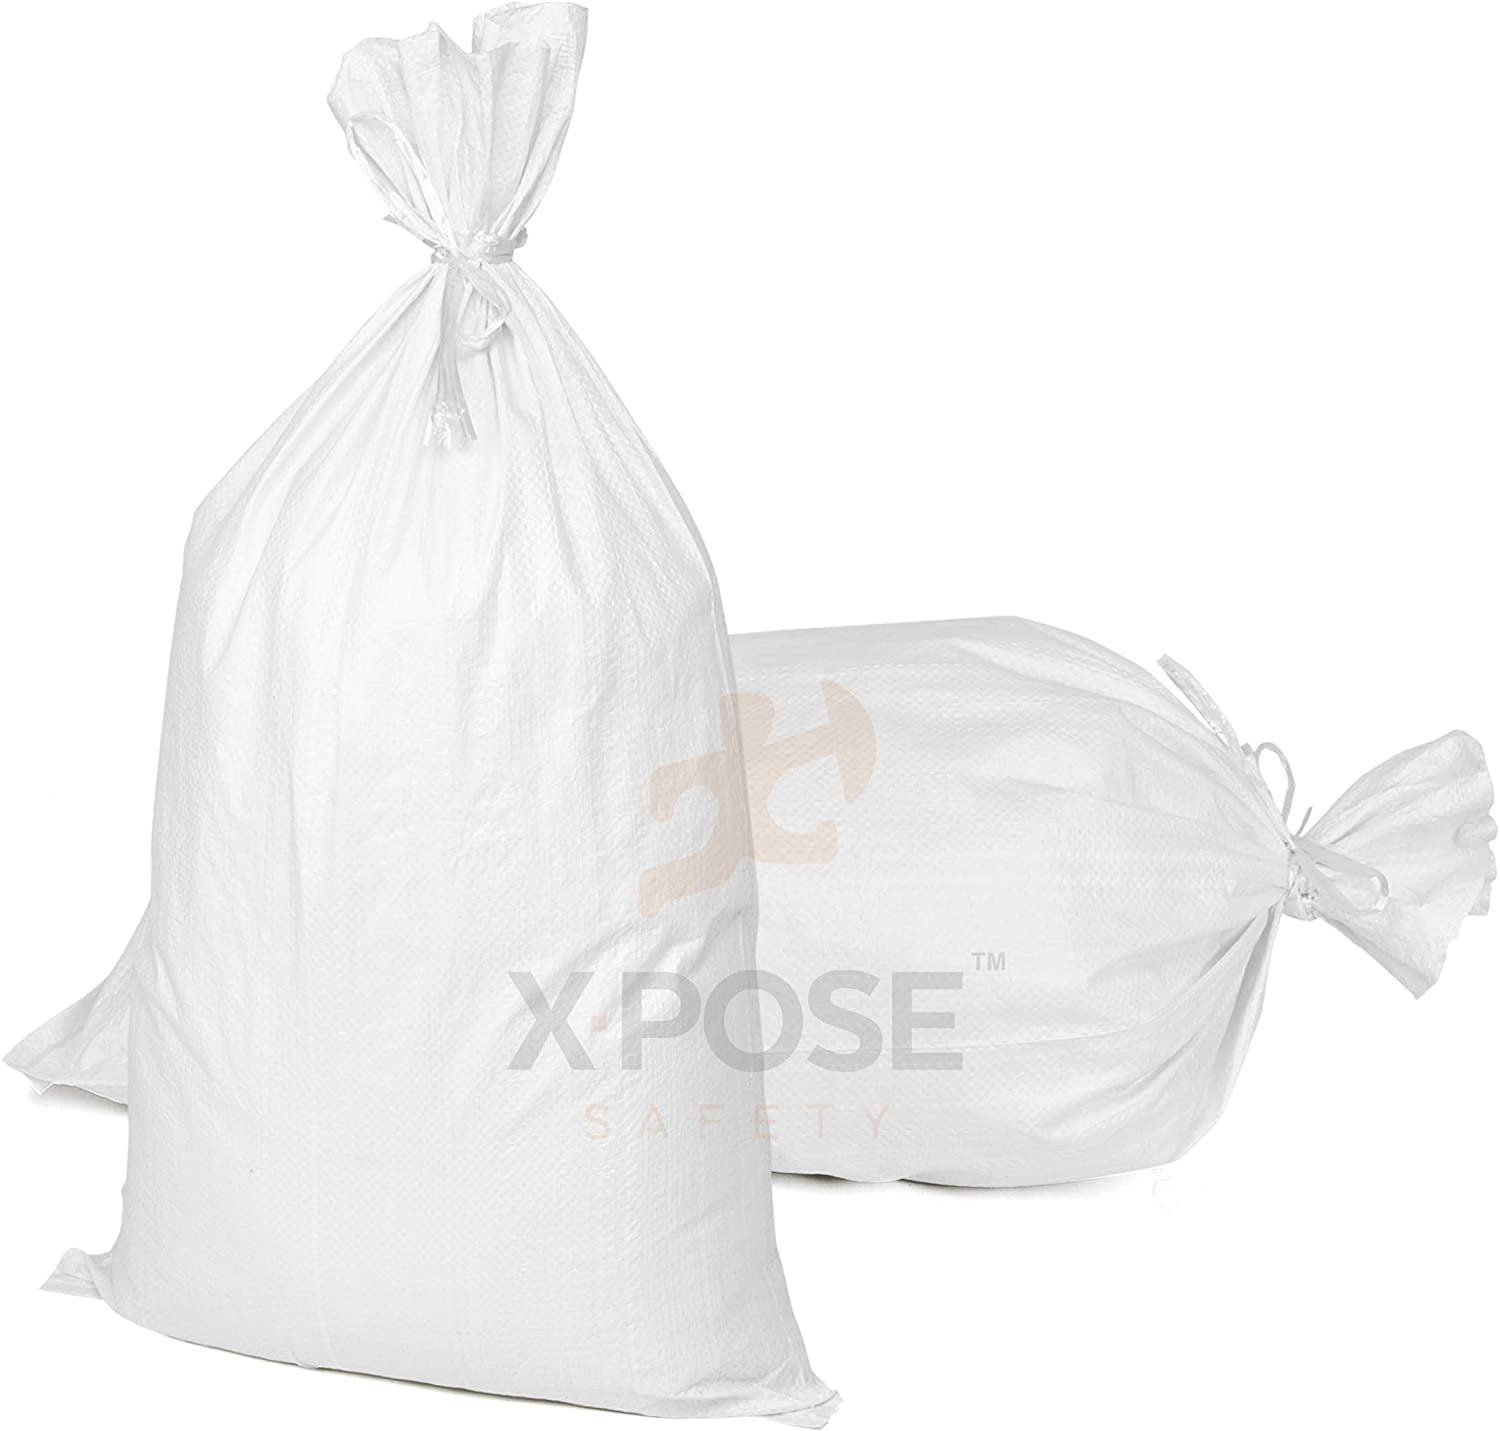 Heavy Duty Empty White Woven Polypropylene Sandbags for Flood Control 20 Pack Ties Included 15 x 27, 